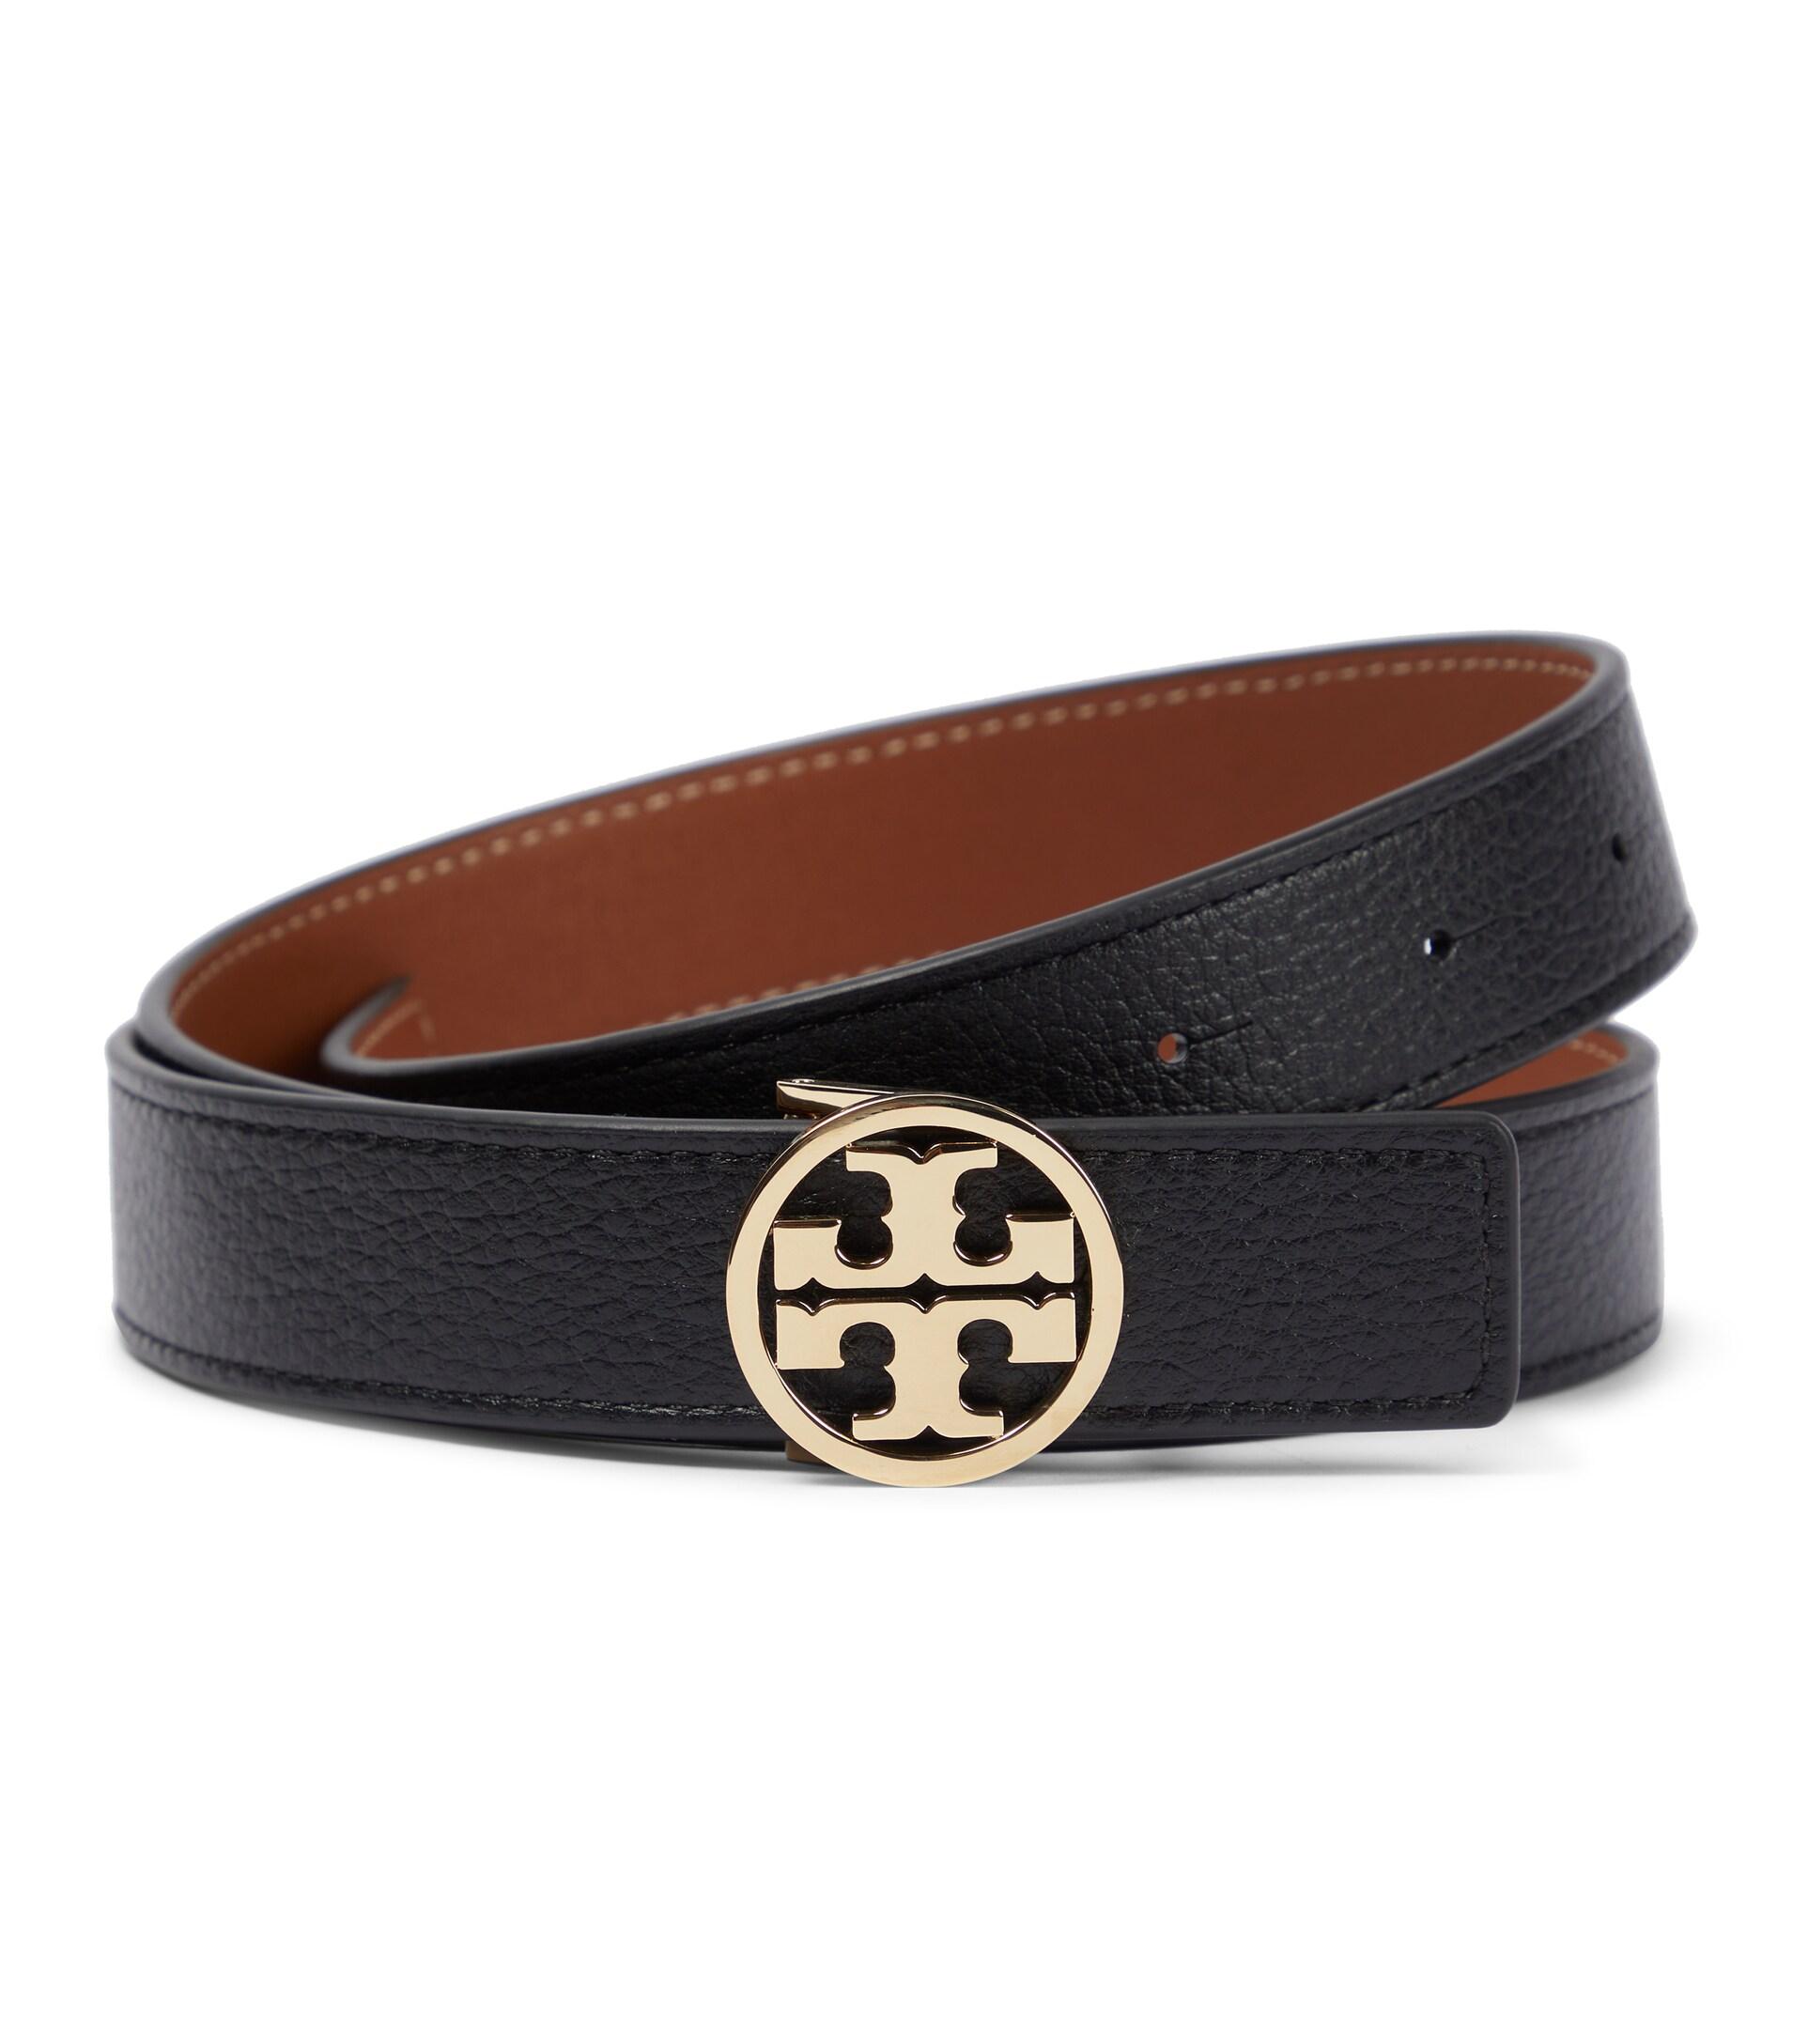 Tory Burch Miller Reversible Leather Belt in Brown | Lyst